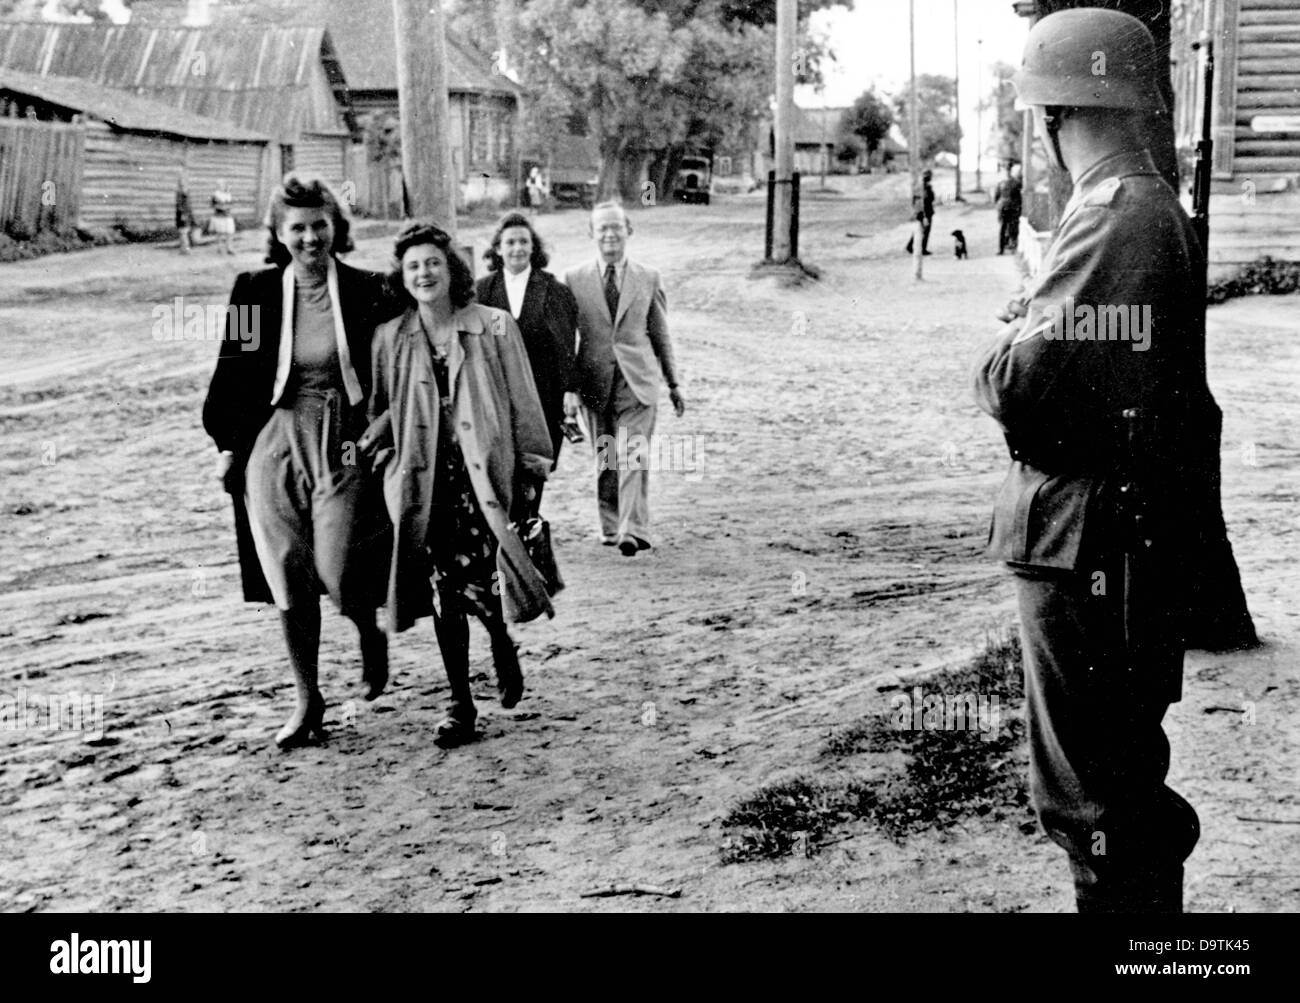 Visitors of a 'Strength through Joy' artist group are pictured on the Eastern Front, published 29 July 1942. The Nazi Propaganda! on the back of the image reads: 'To the amazement of the post. Female Europeans in the village! They are members of the Strength through Joy artist goup during the evening stroll through the village, where they - just a few kilometers behind the front line - gave a sensational guest performance for our soldiers.' The attack on Russia by the German Reich was agreed on in July 1940 and prepared since December 1940 as the 'Operation Barbarossa'. ON 22 June 1941, the in Stock Photo